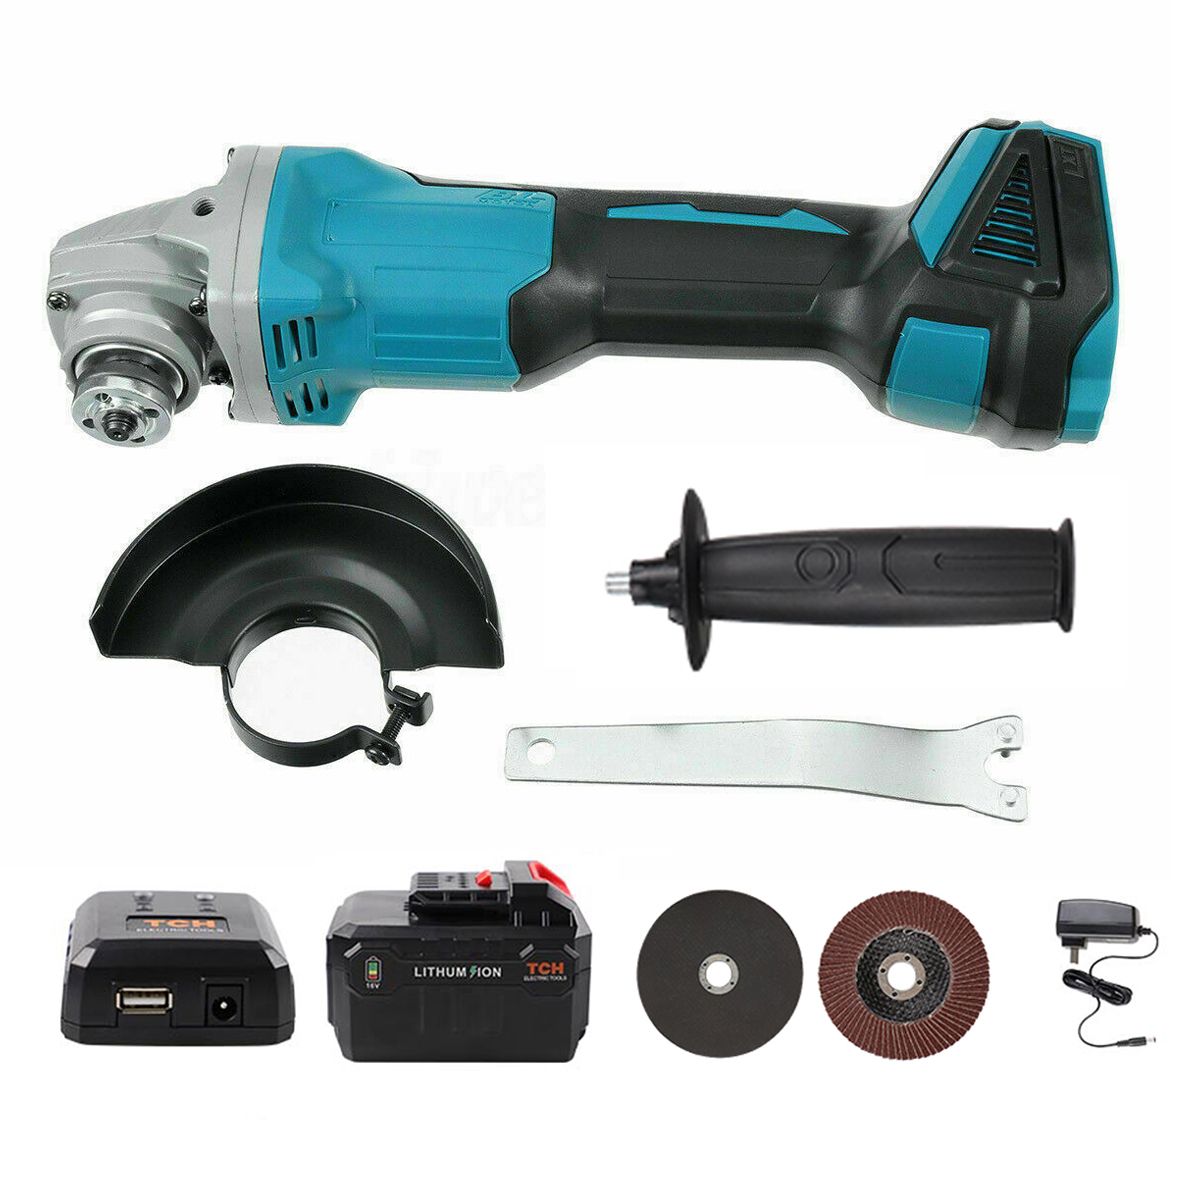 21V-Cordless-Brushless-Lithium-Ion-Angle-Grinder-Grinding-Power-Tool-Cutting-1707731